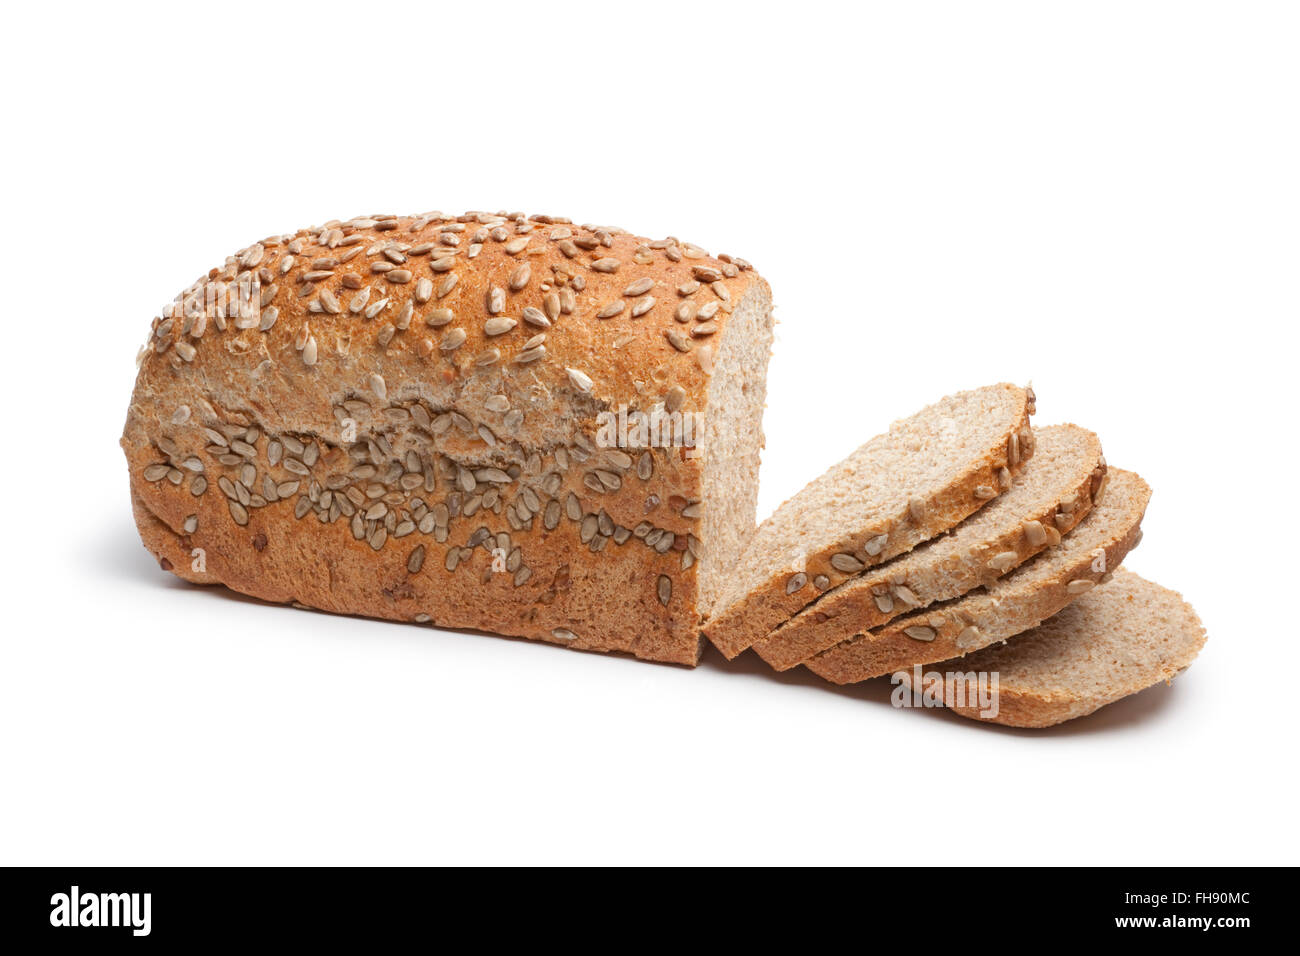 Fresh whole wheat bread with sunflower seeds and slices on white background Stock Photo